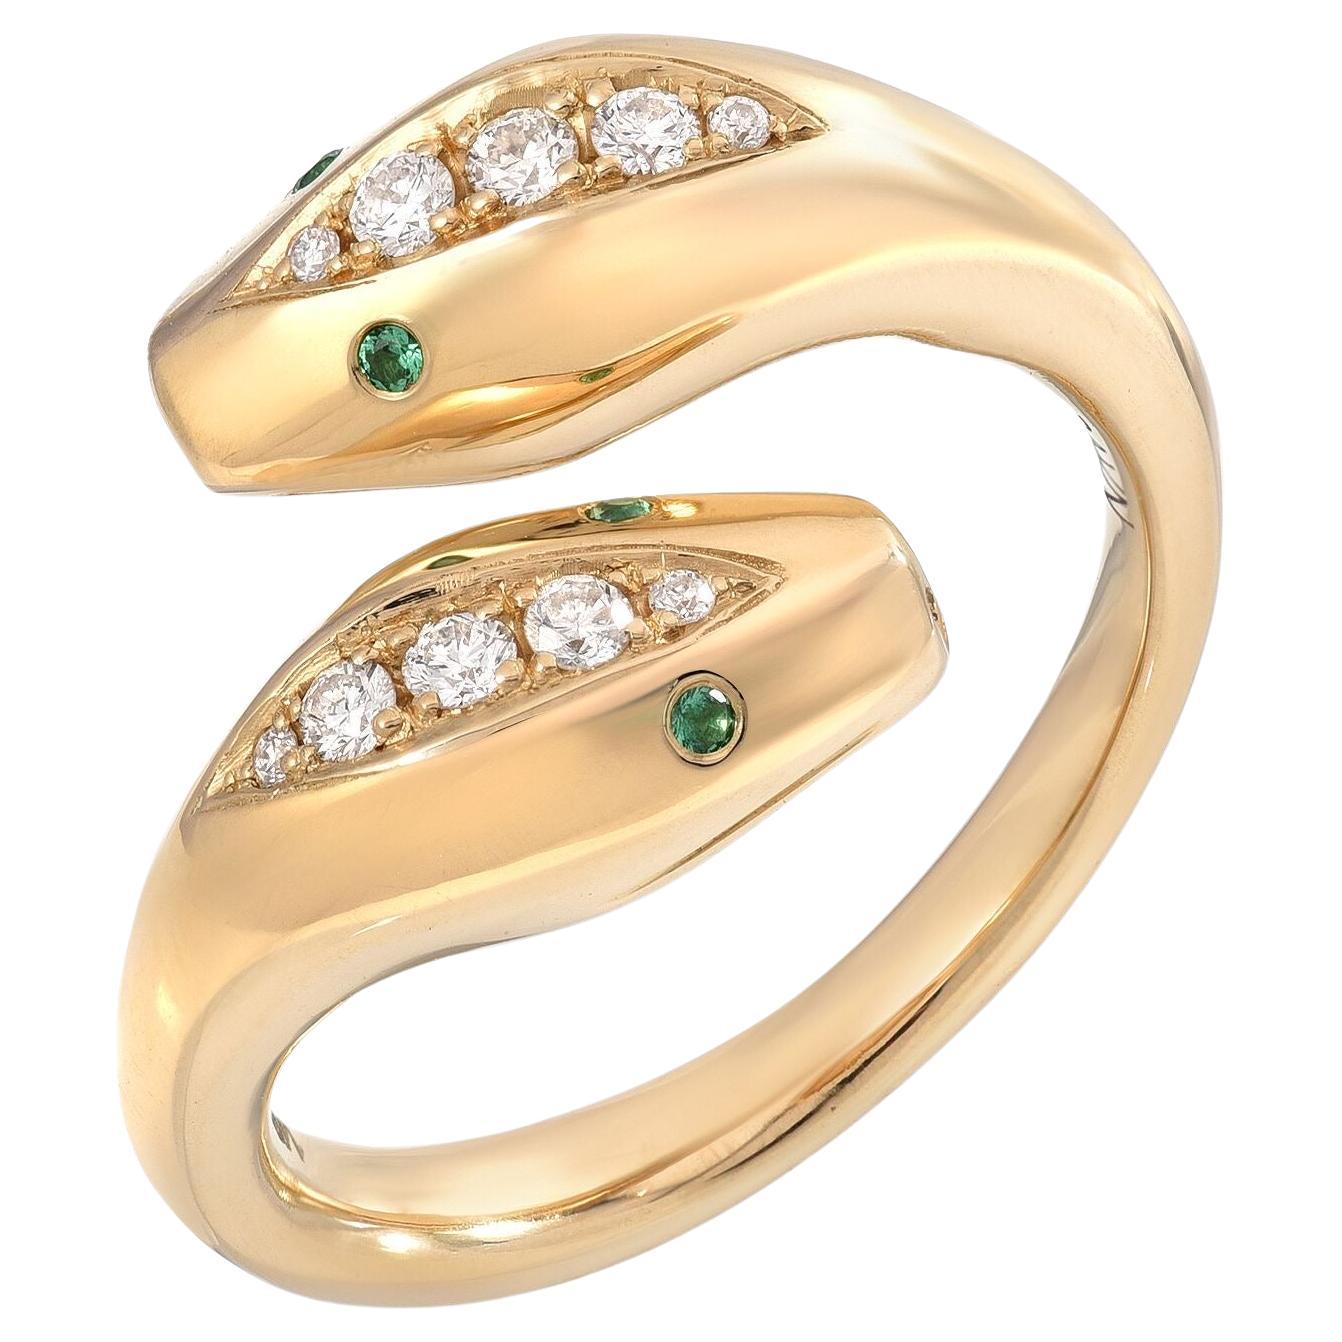 Contemporary House of RAVN, 14k Gold 2 Headed Serpent Wrap Ring w/ Emerald & Diamond details For Sale